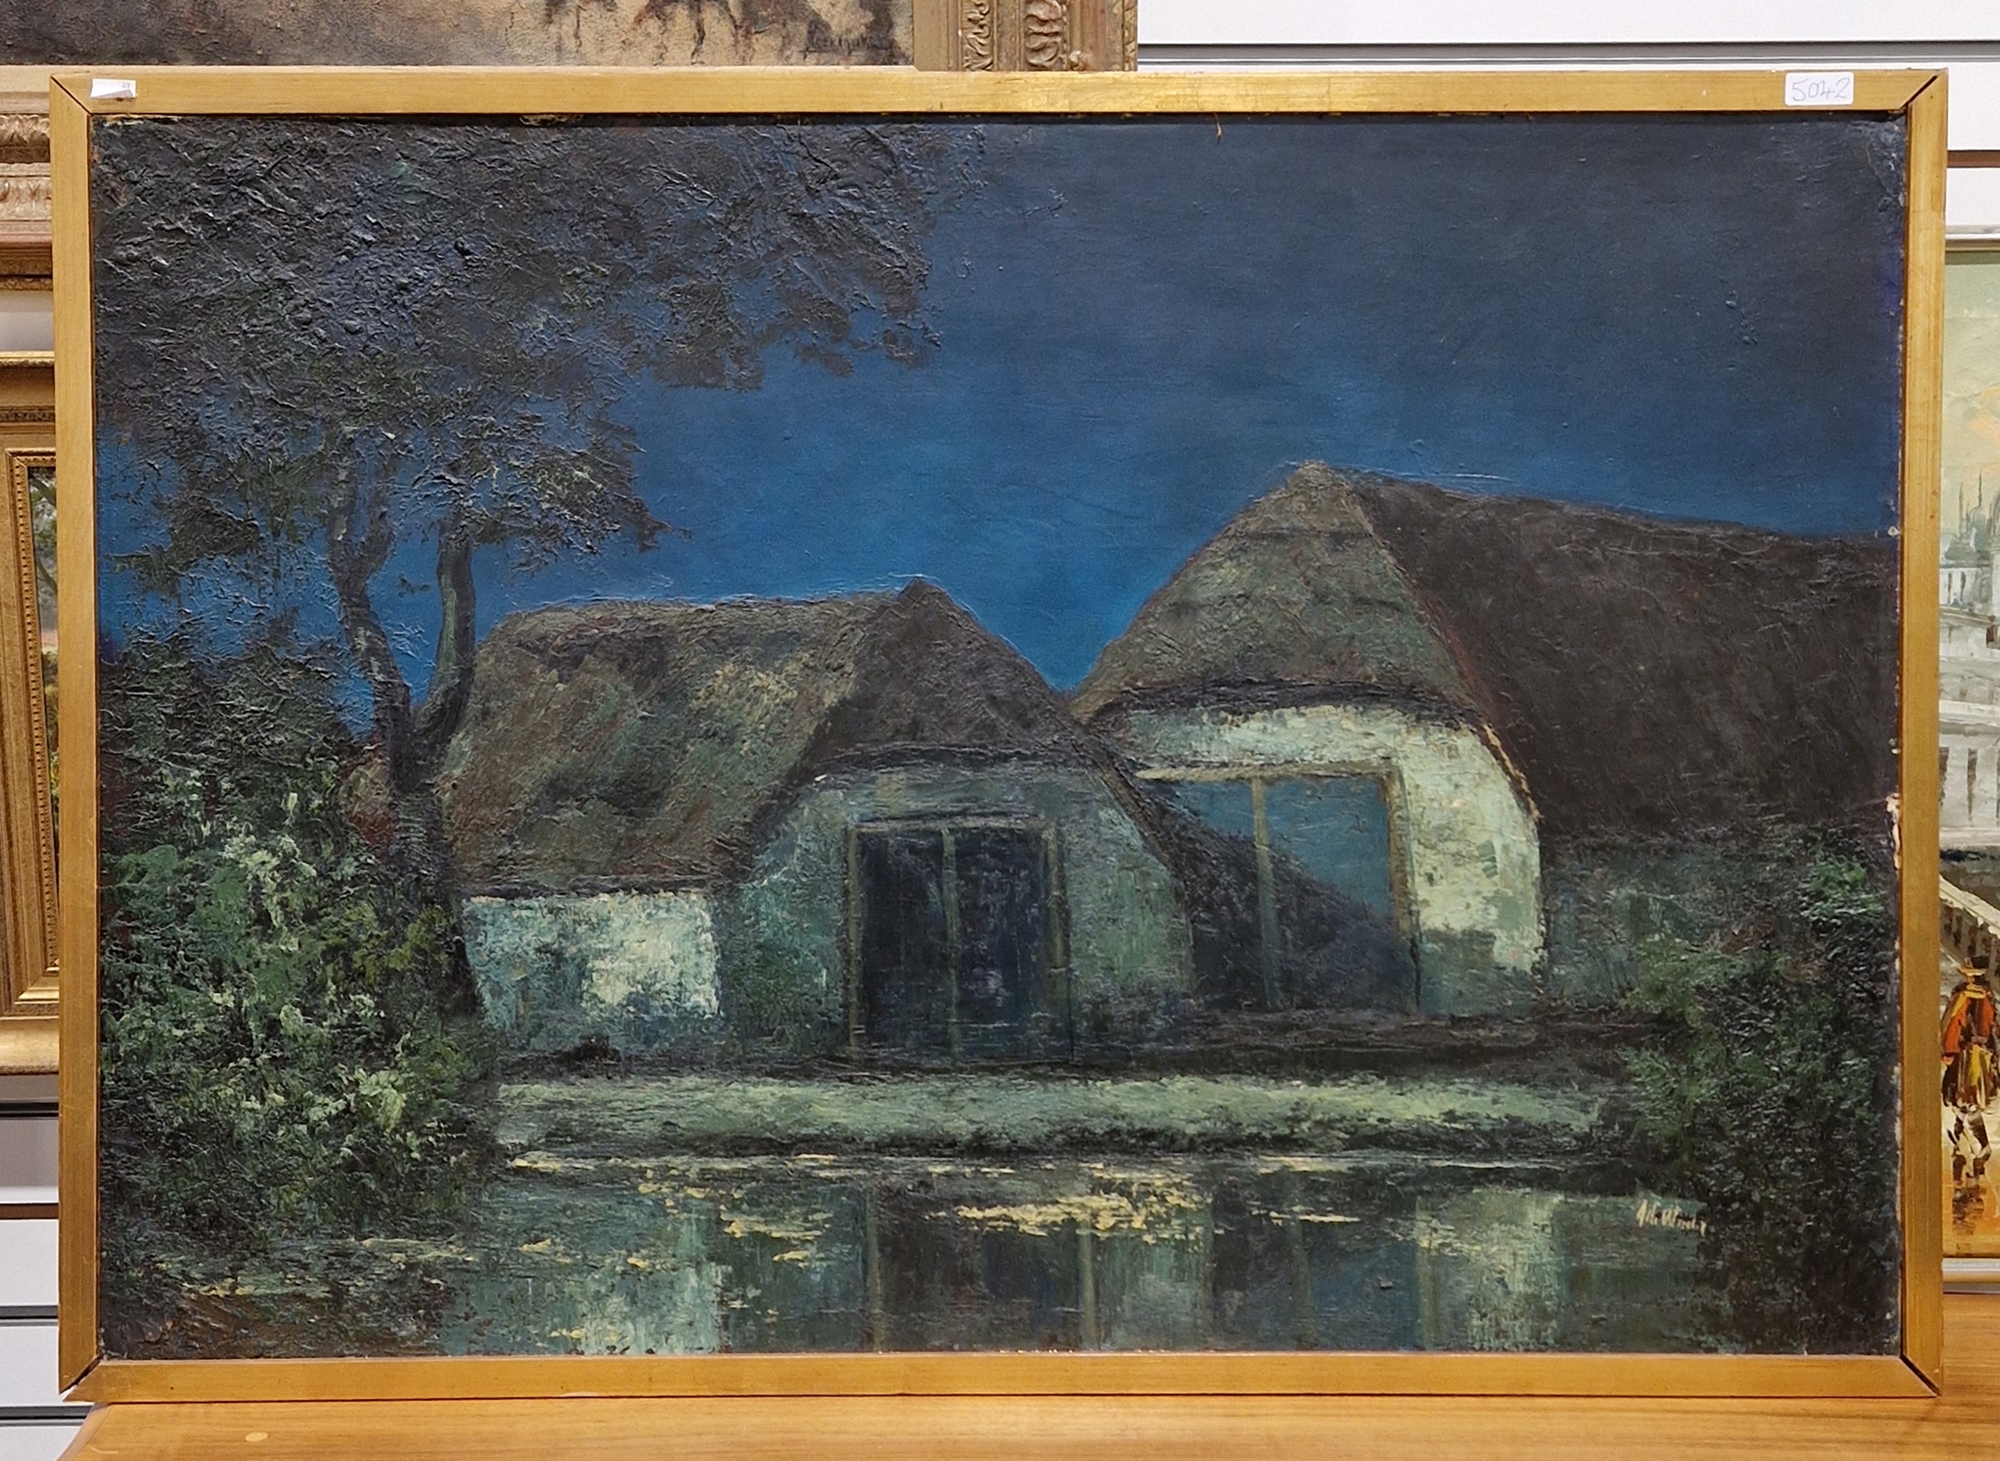 Alli Wintry/Utintry? (20th century) Oil on board Moonlit scene of two thatched barns beside a - Image 2 of 6